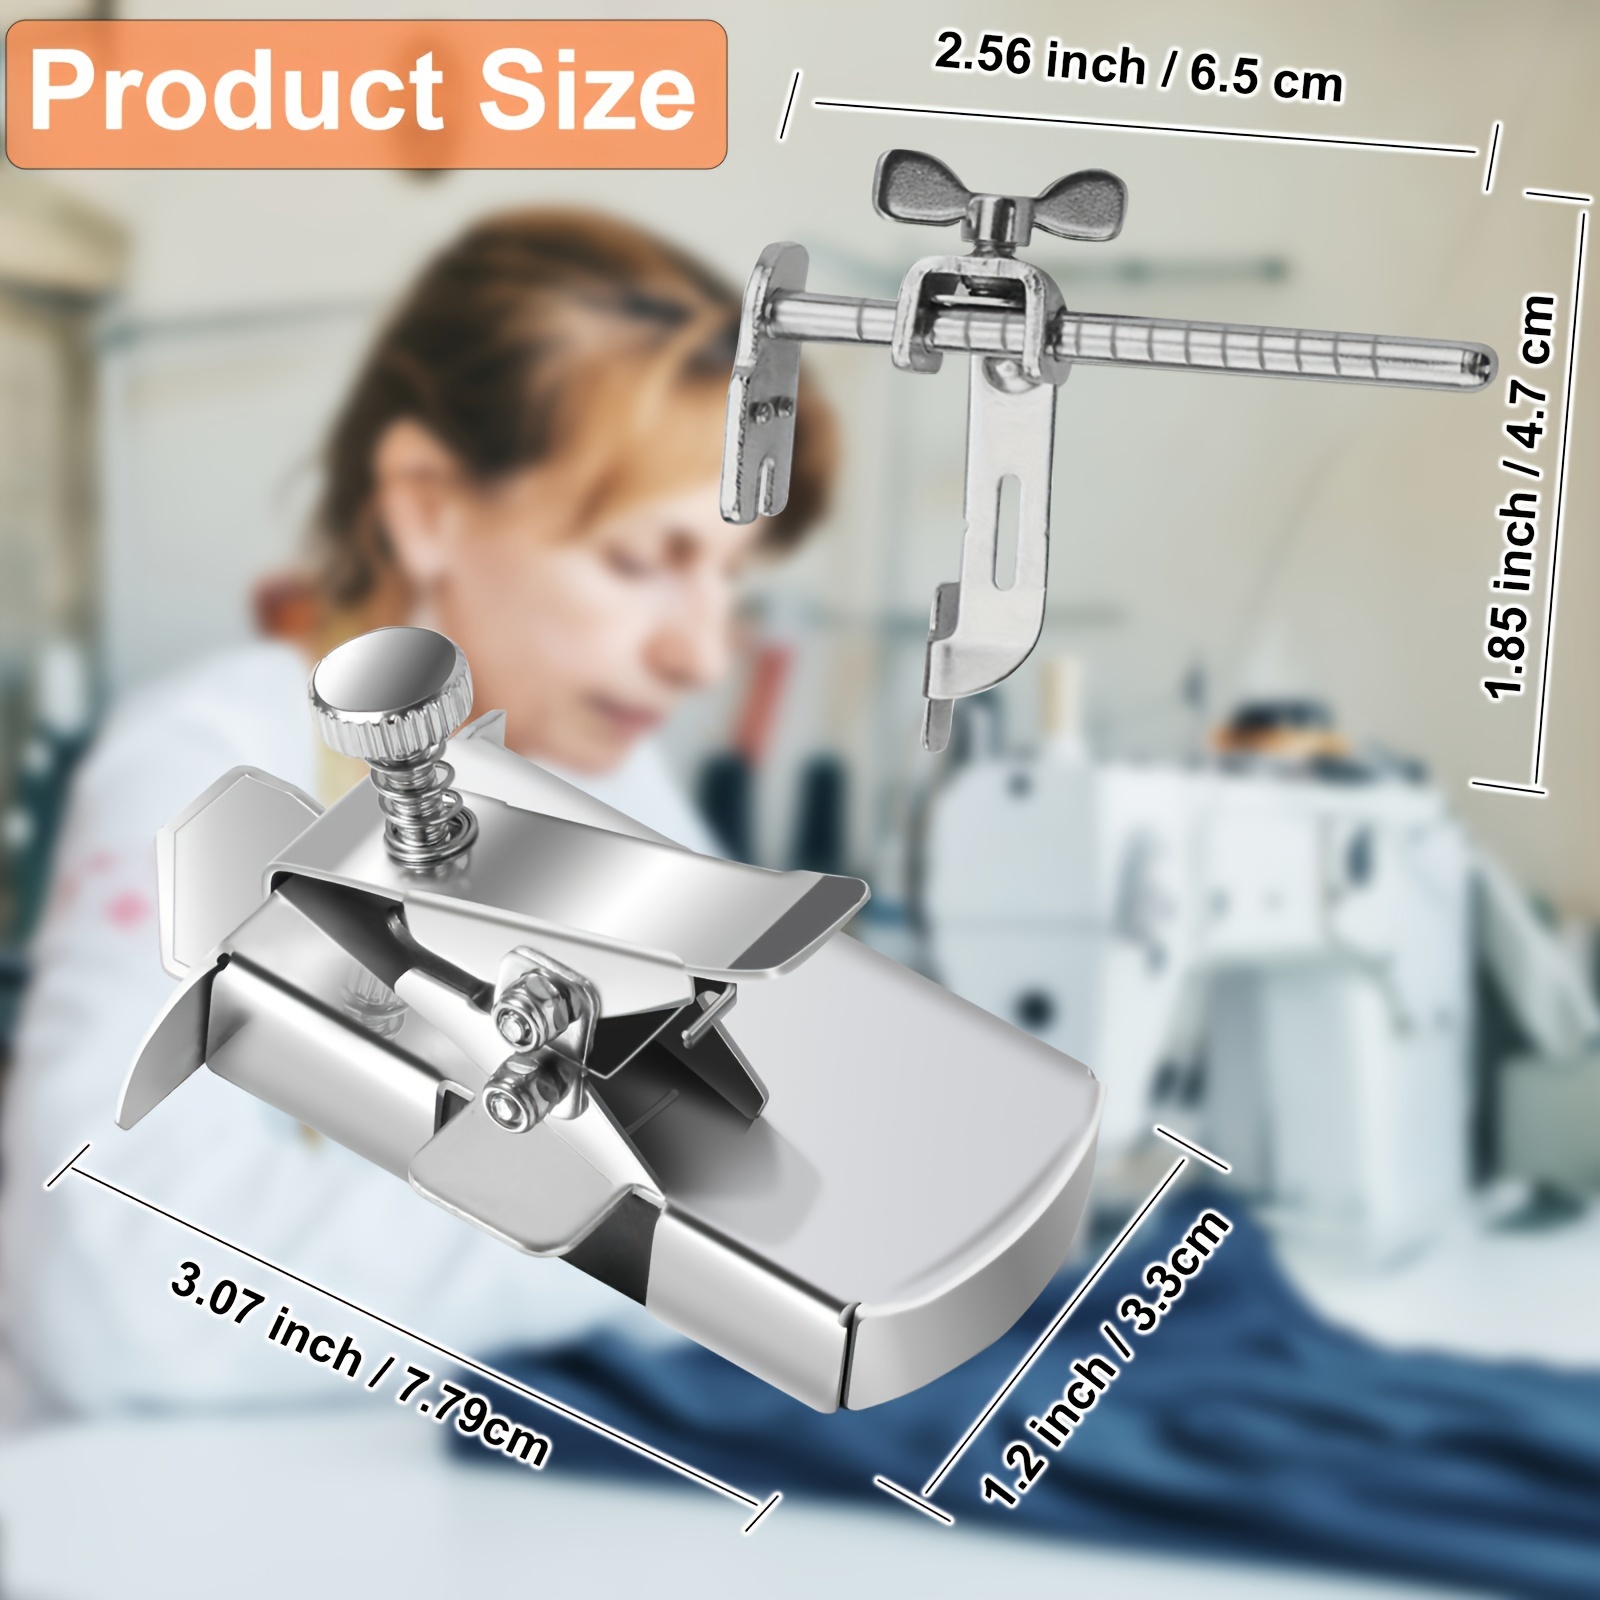 2pcs Universal Magnetic Seam Guide Sewing Machine Foot Sewing